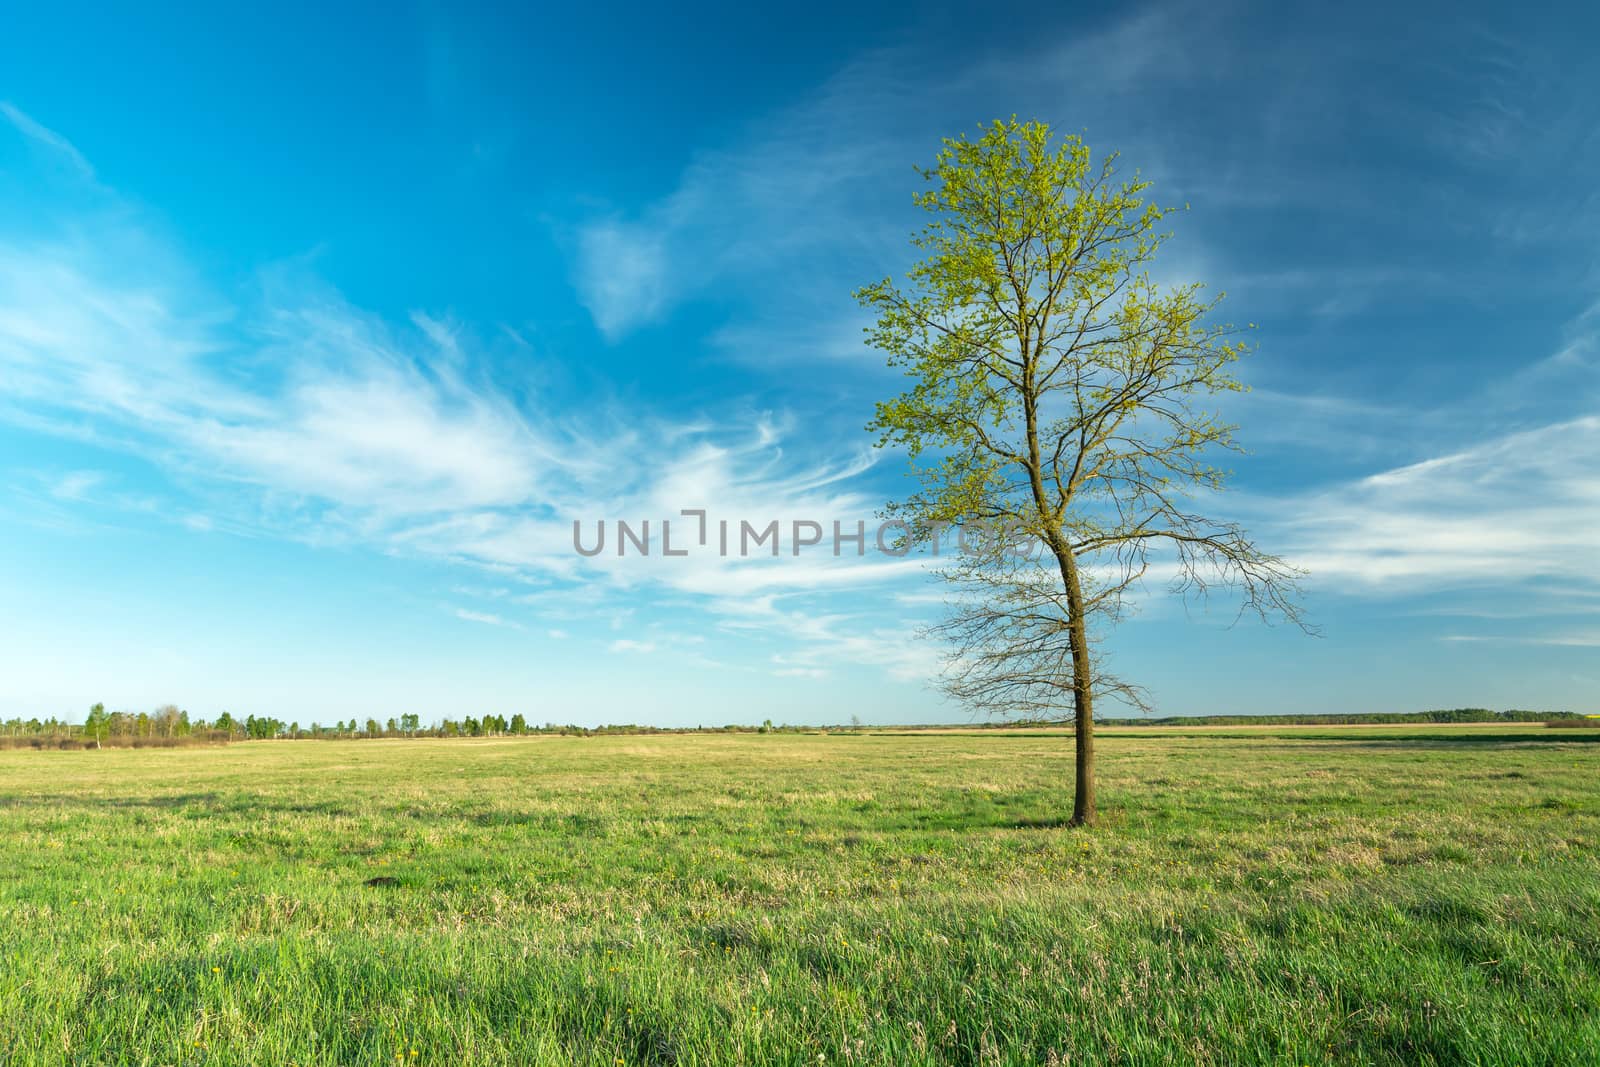 Lonely tree in a meadow and white clouds against the blue sky by darekb22